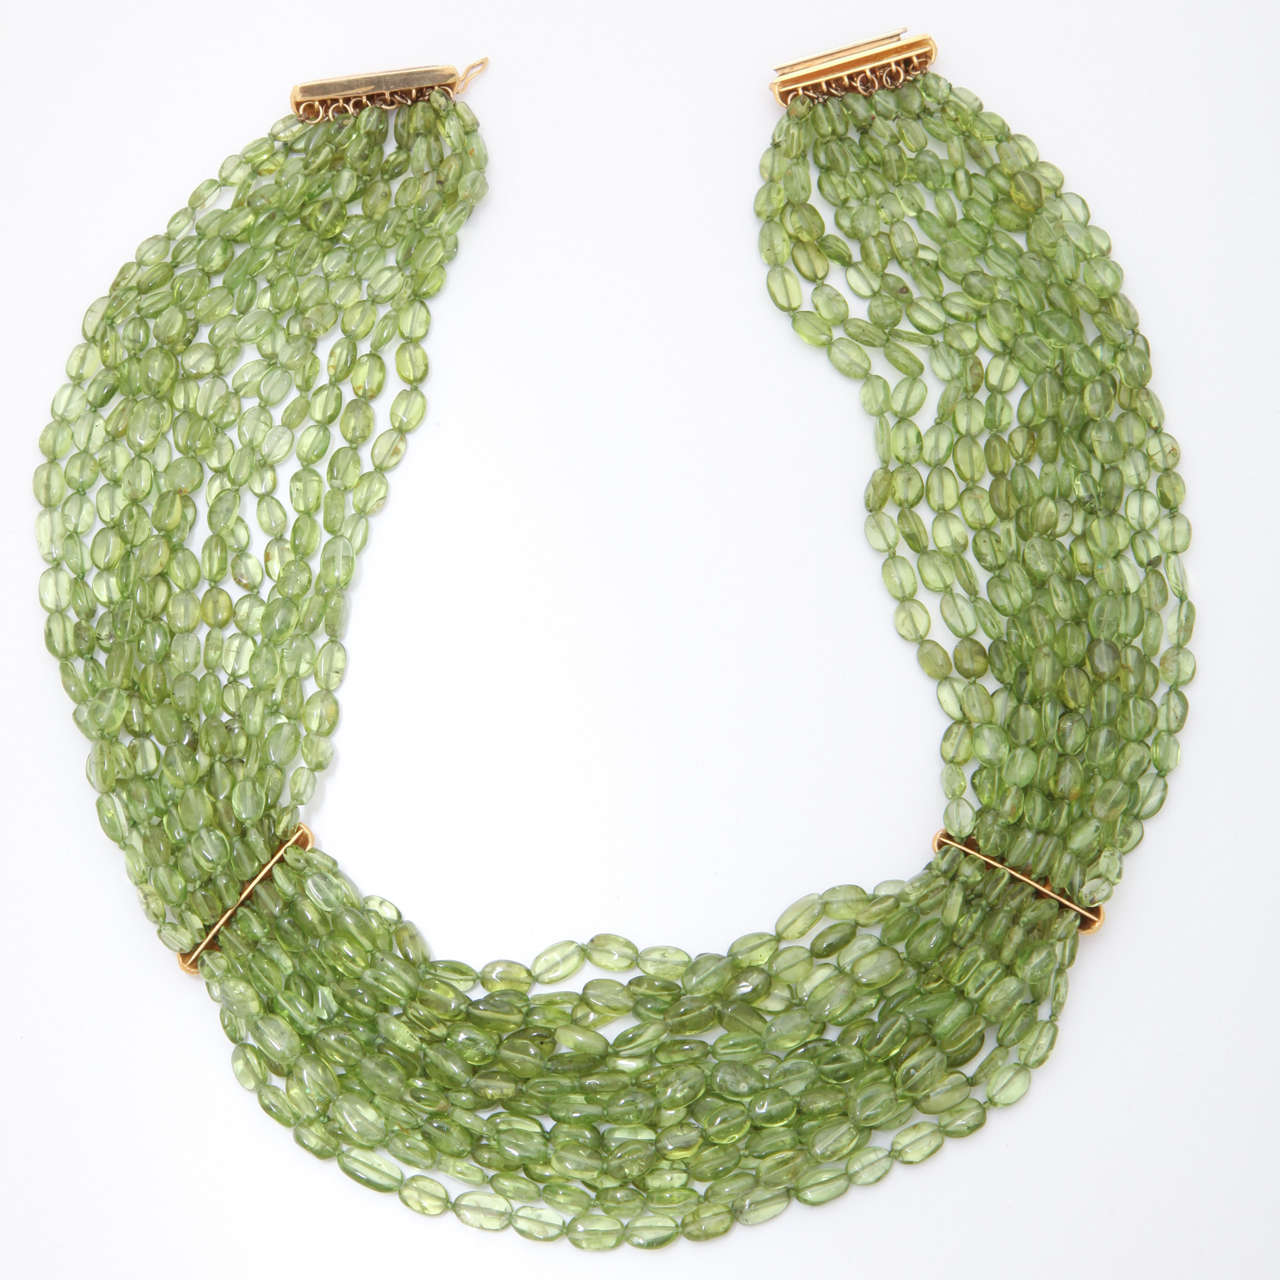 14 Strands of beautiful clear green peridot oval beads are divided into 3 sections by 18 kt pink gold bars. These bars are delicately carved with overlapping laurel leaves. The clasp is the same as the dividers and is a bayonet style where one bar